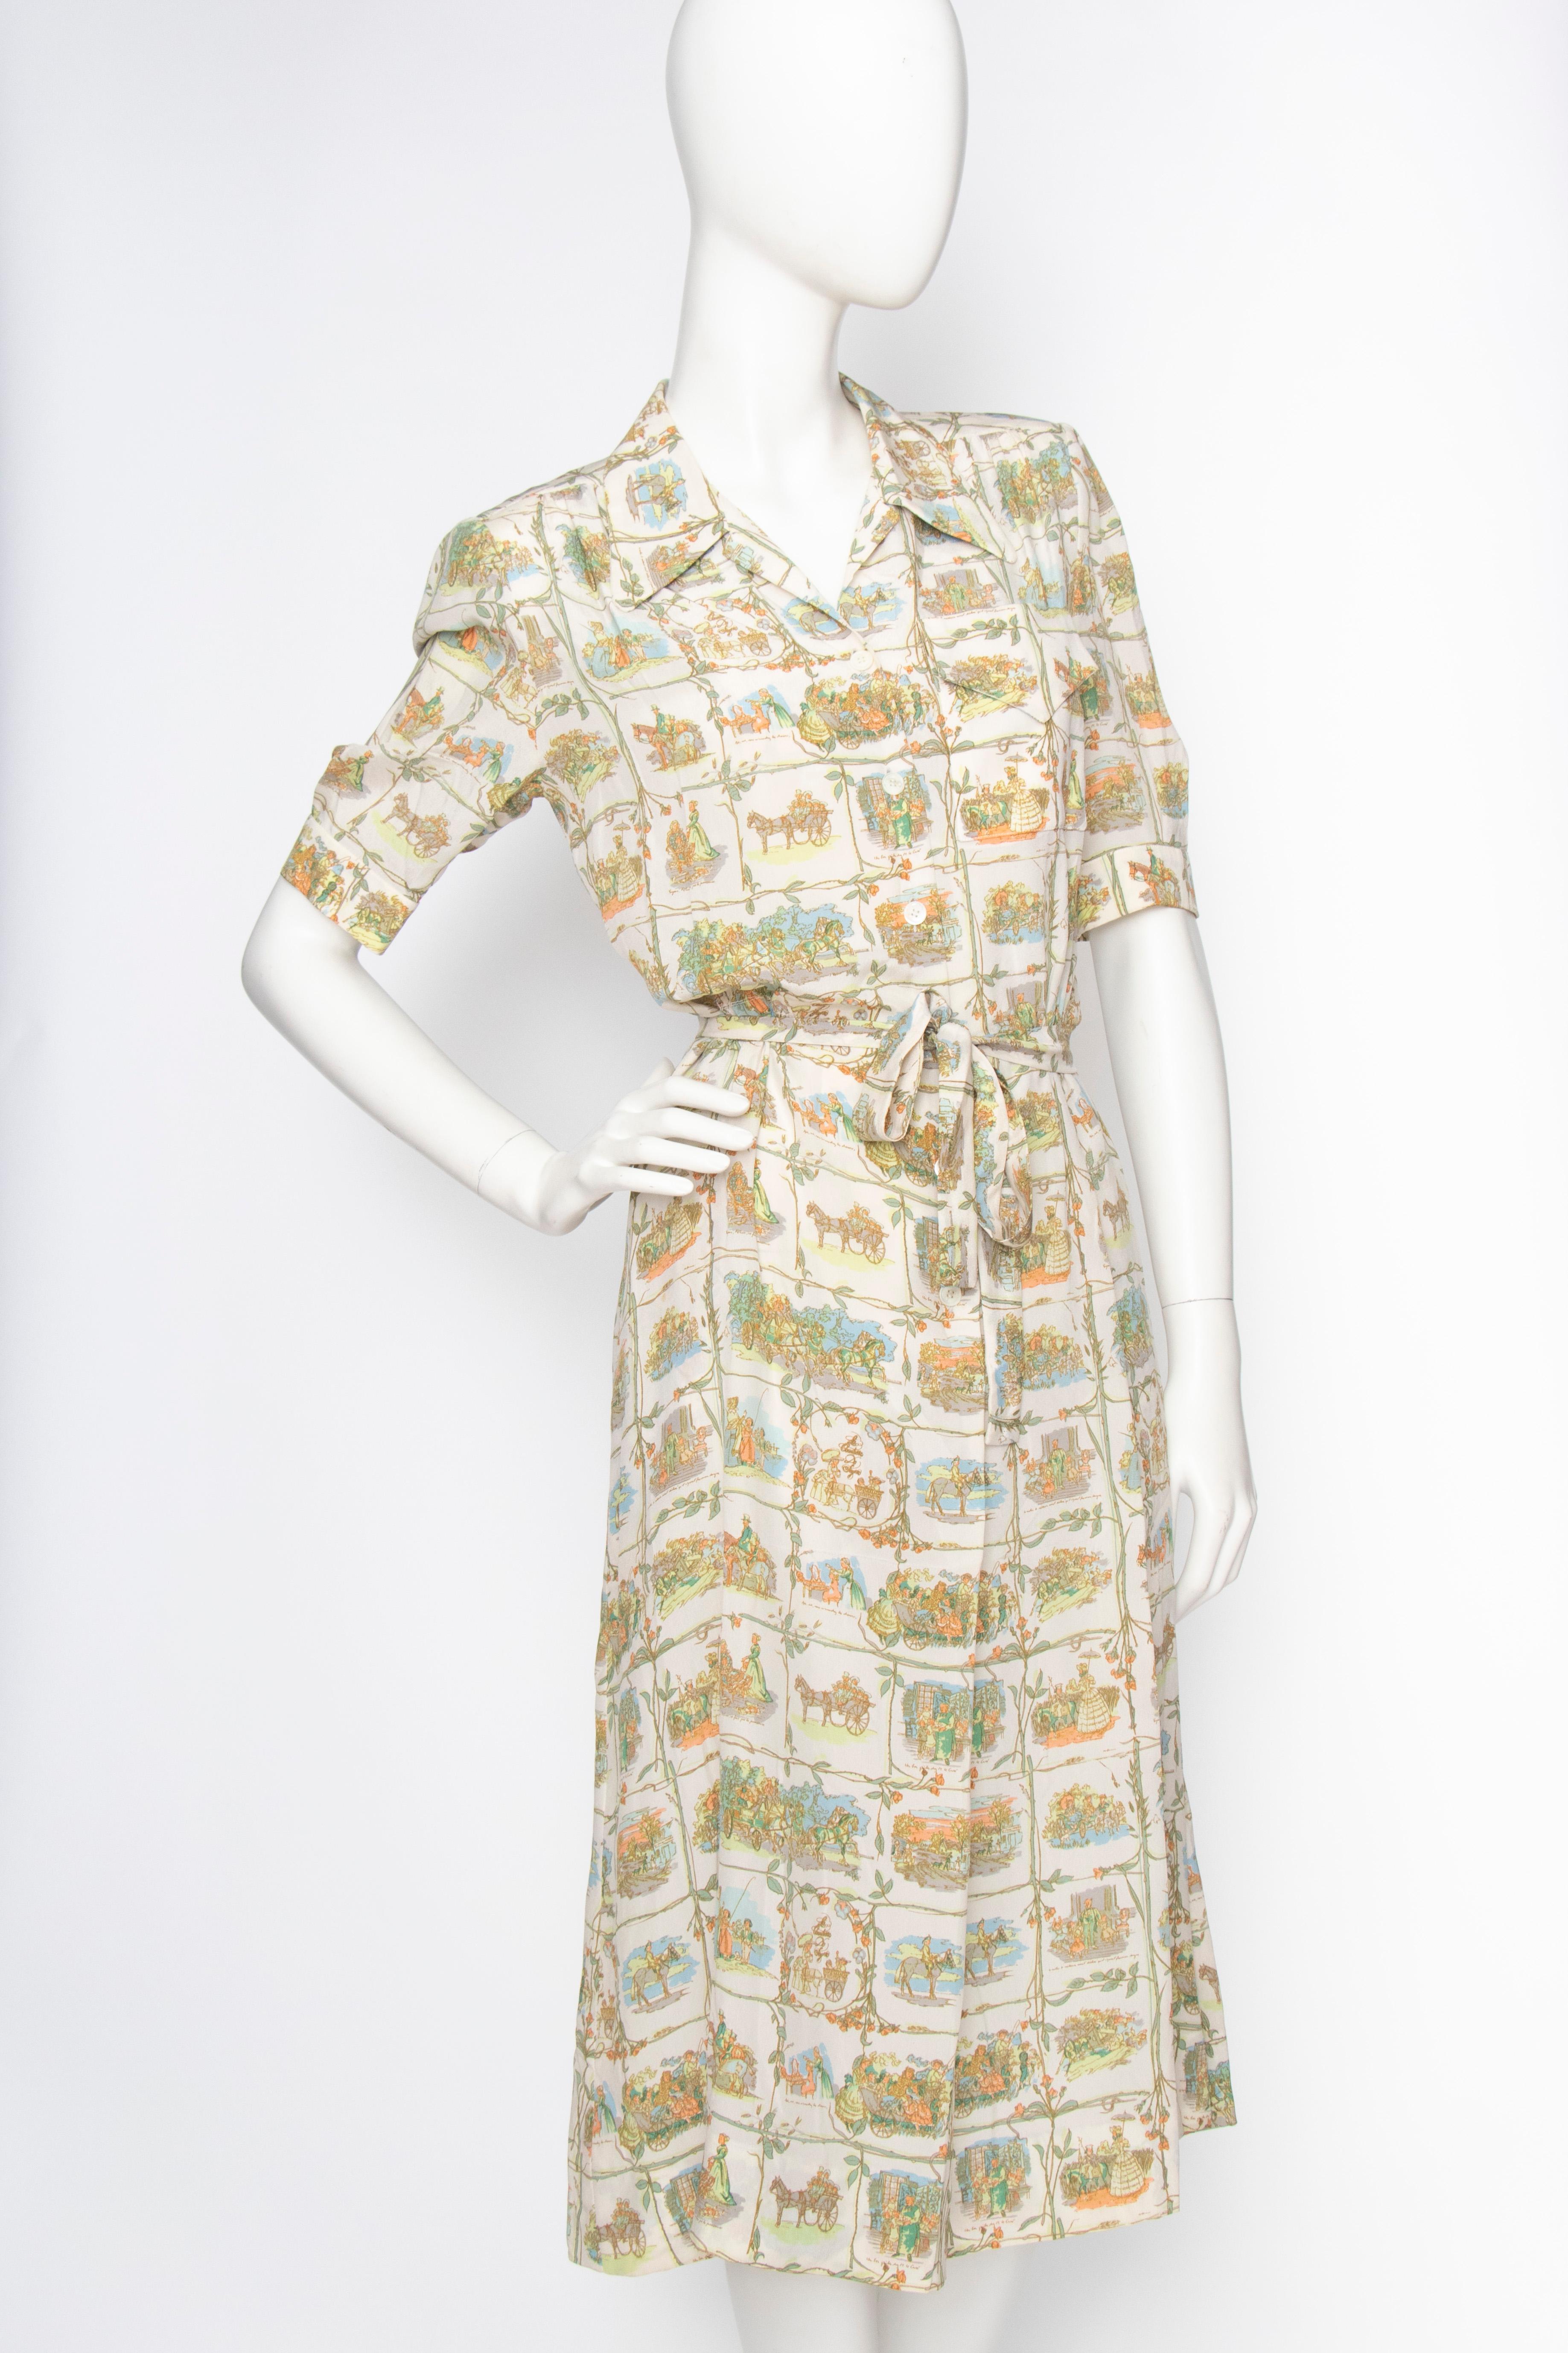 An incredible 1970s Hermès silk day dress with a button-down front, pleated skirt and short voluminous sleeves. The stunning ivory dress has a delicate print held in light shades of green, pink and blue. 

The size corresponds to a modern size extra